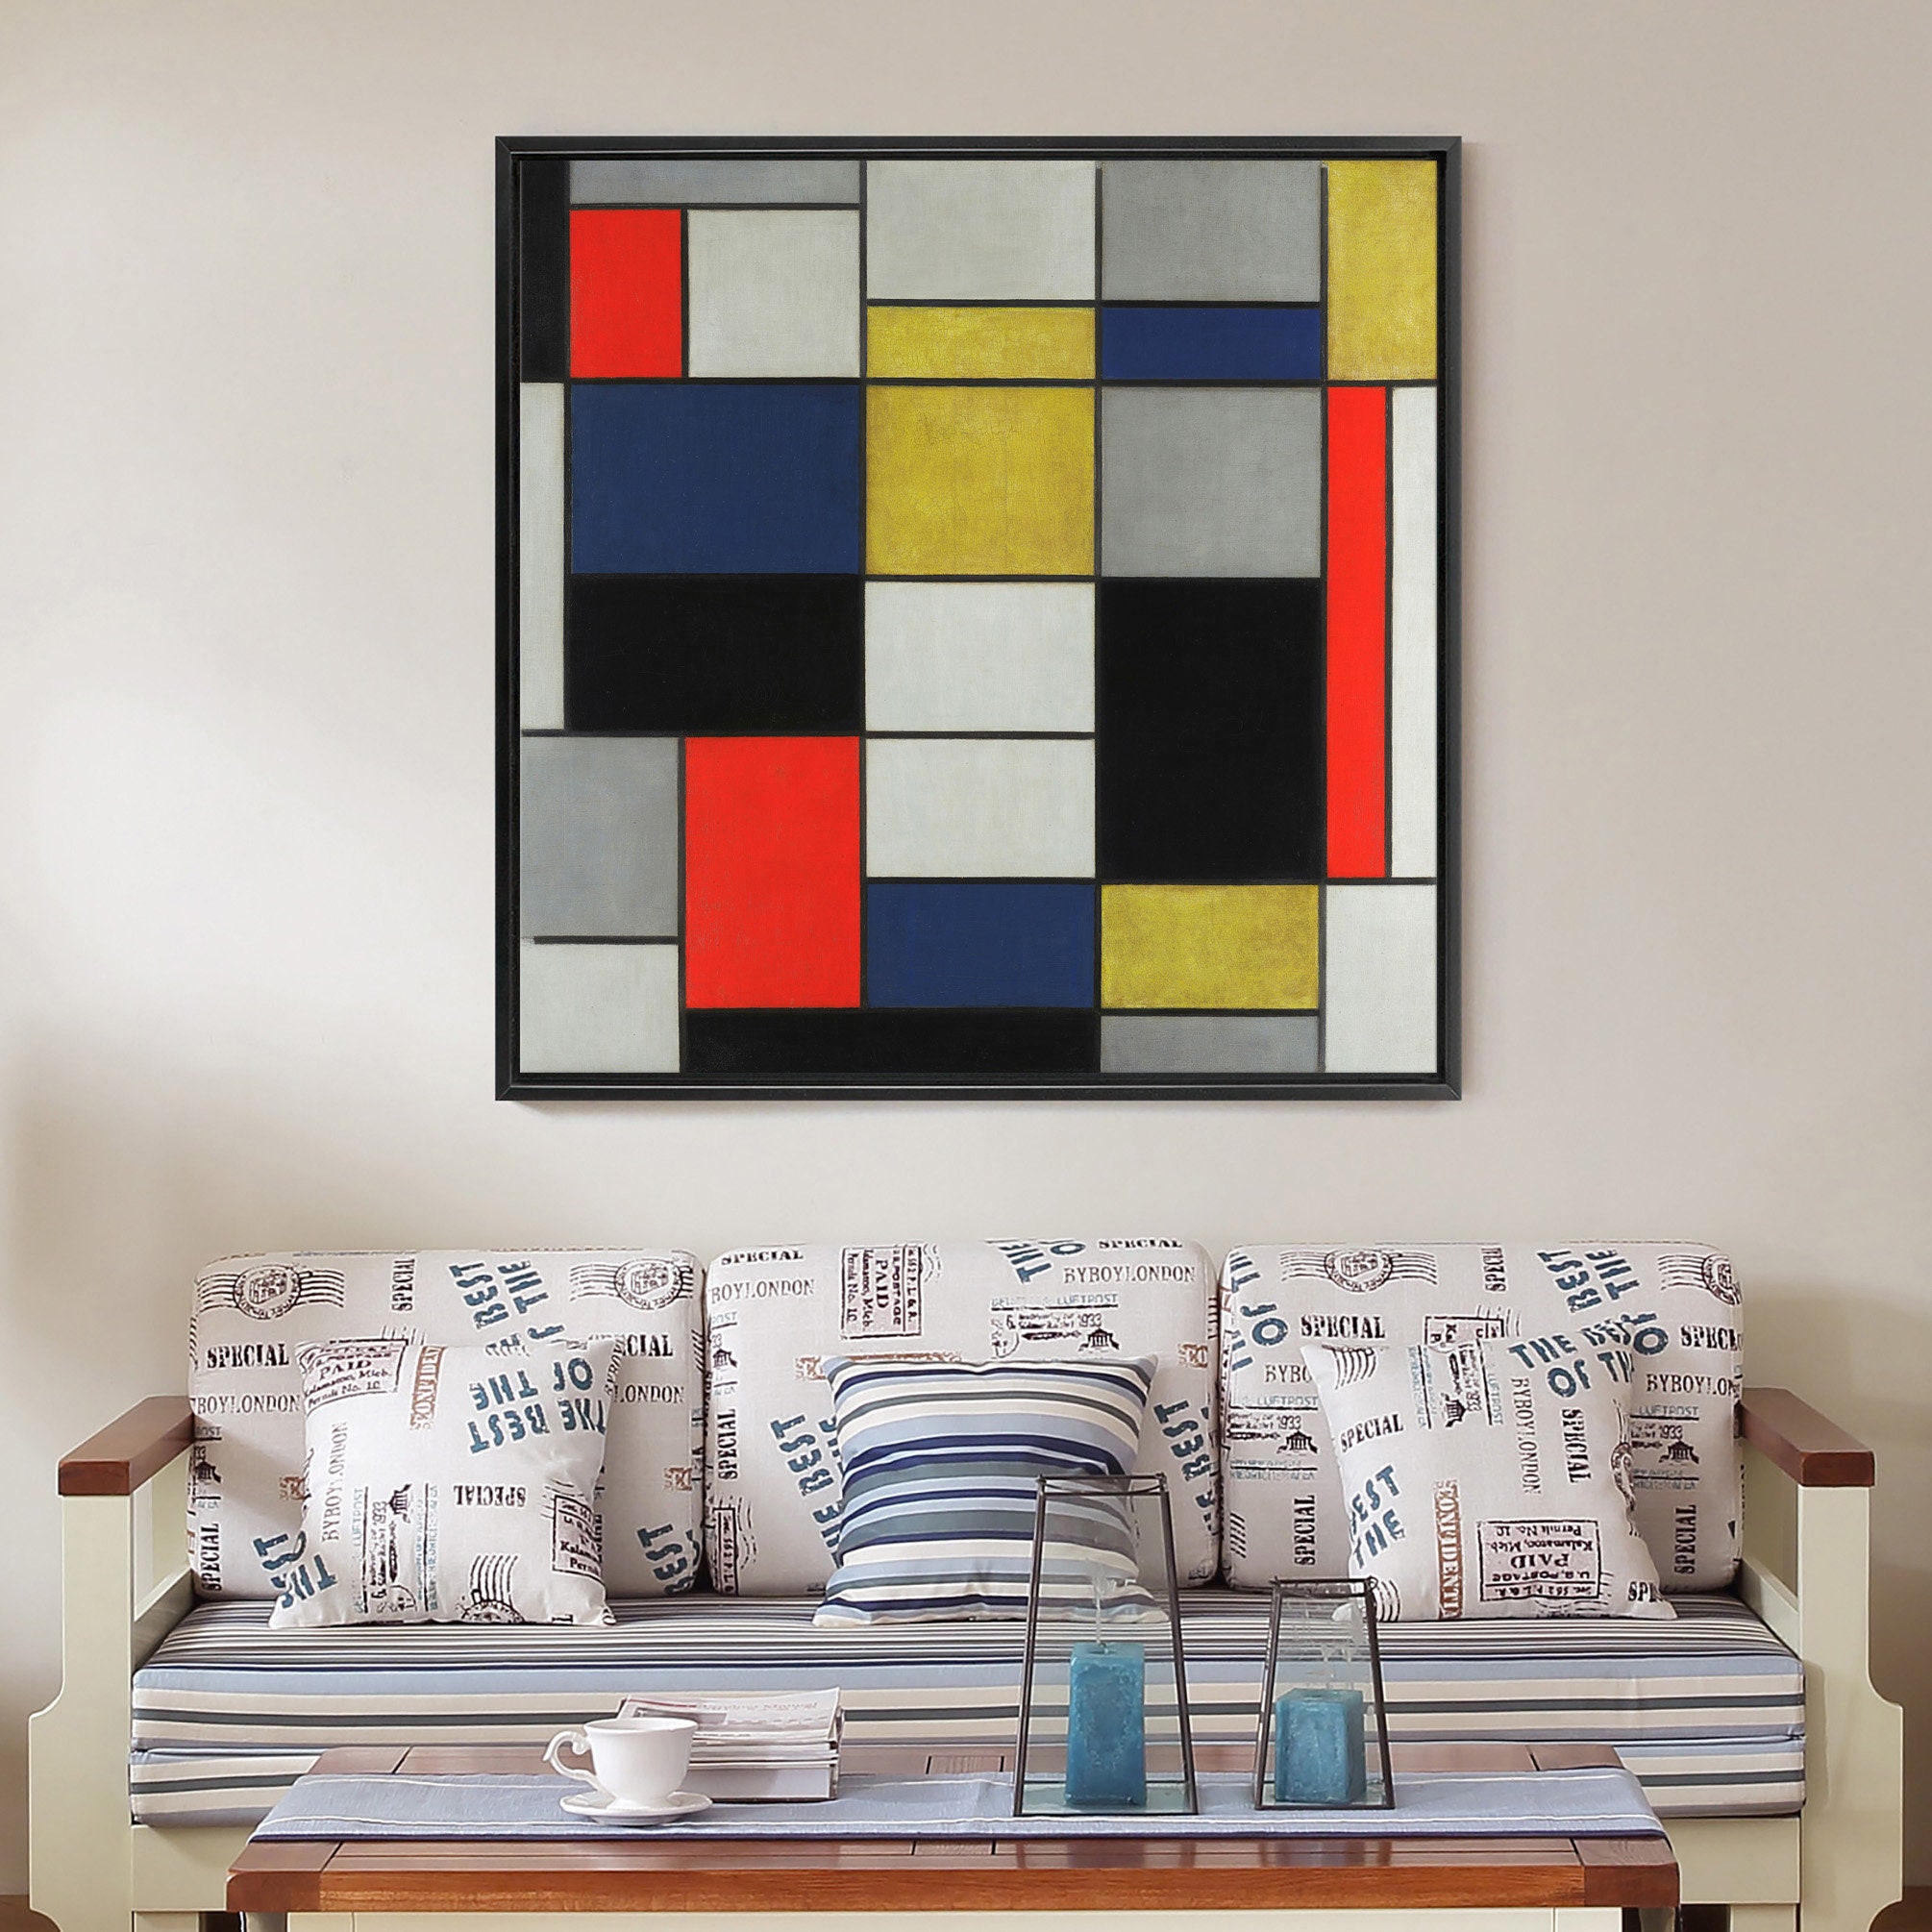 Piet Mondrian Large composition A with black red gray yellow | Etsy